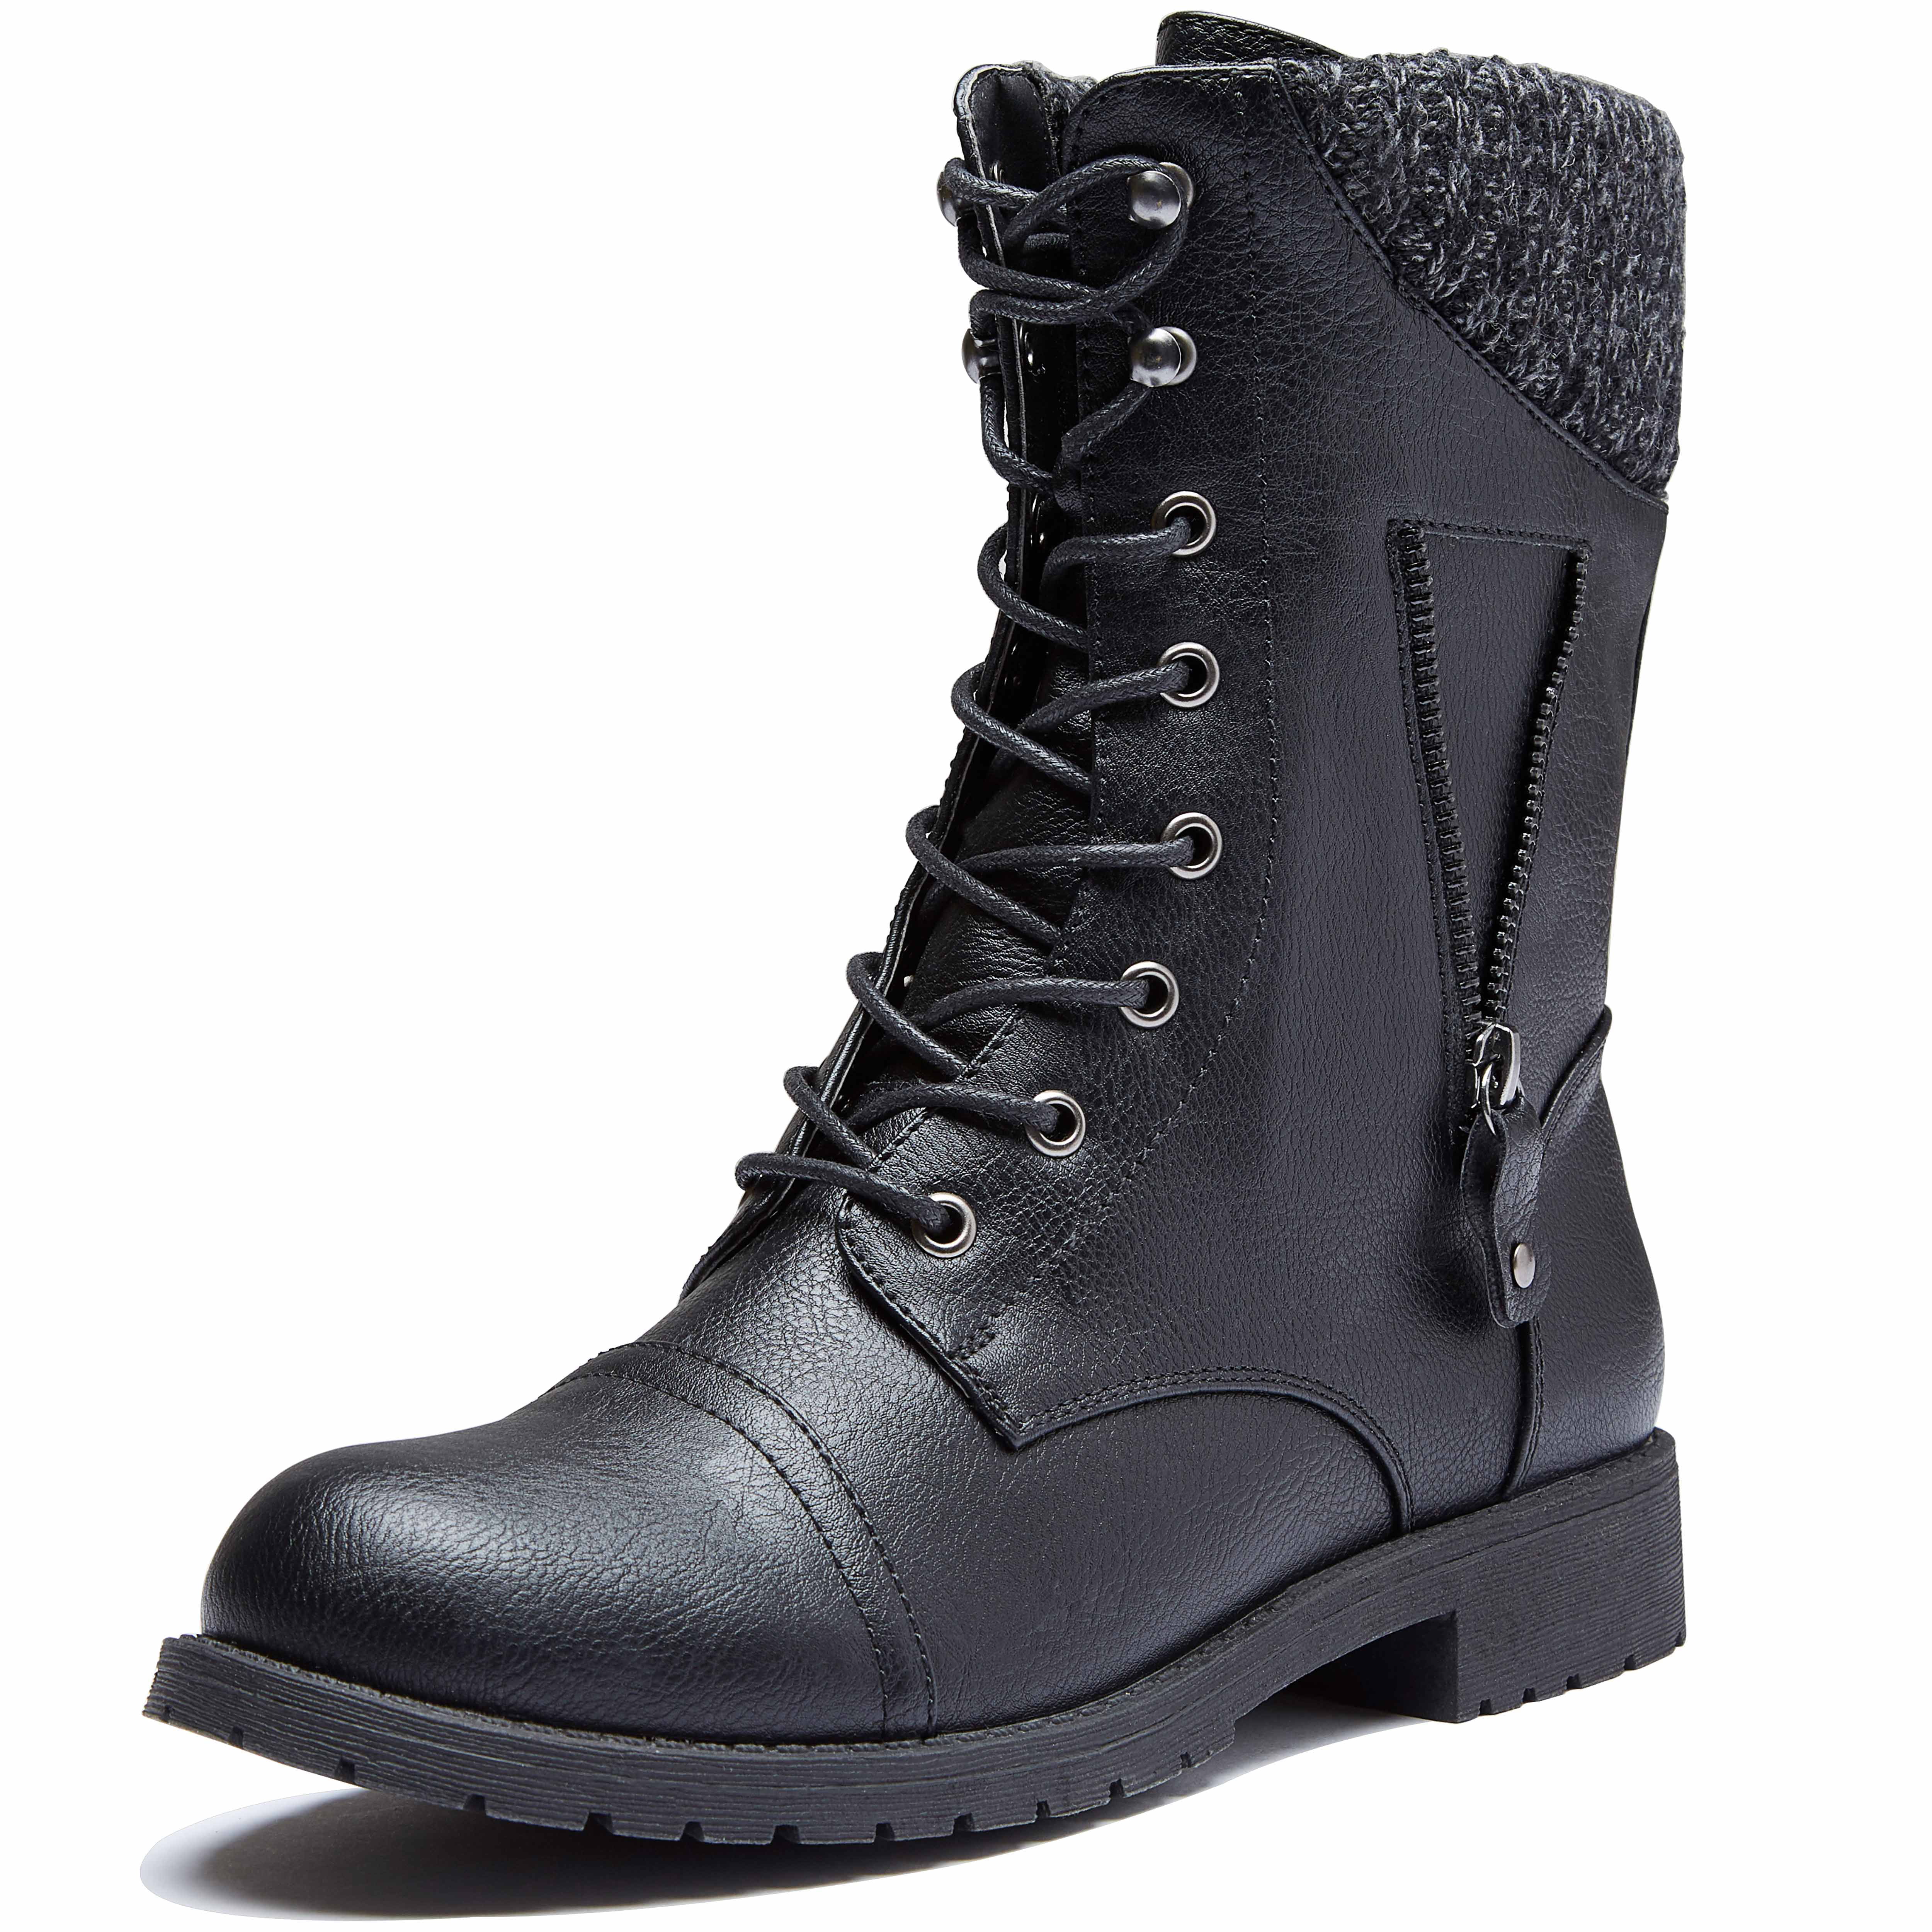 WOMENS LADIES LACE UP ZIP PUNK BIKER COMBAT WORKER MILITARY ARMY ANKLE BOOTS 